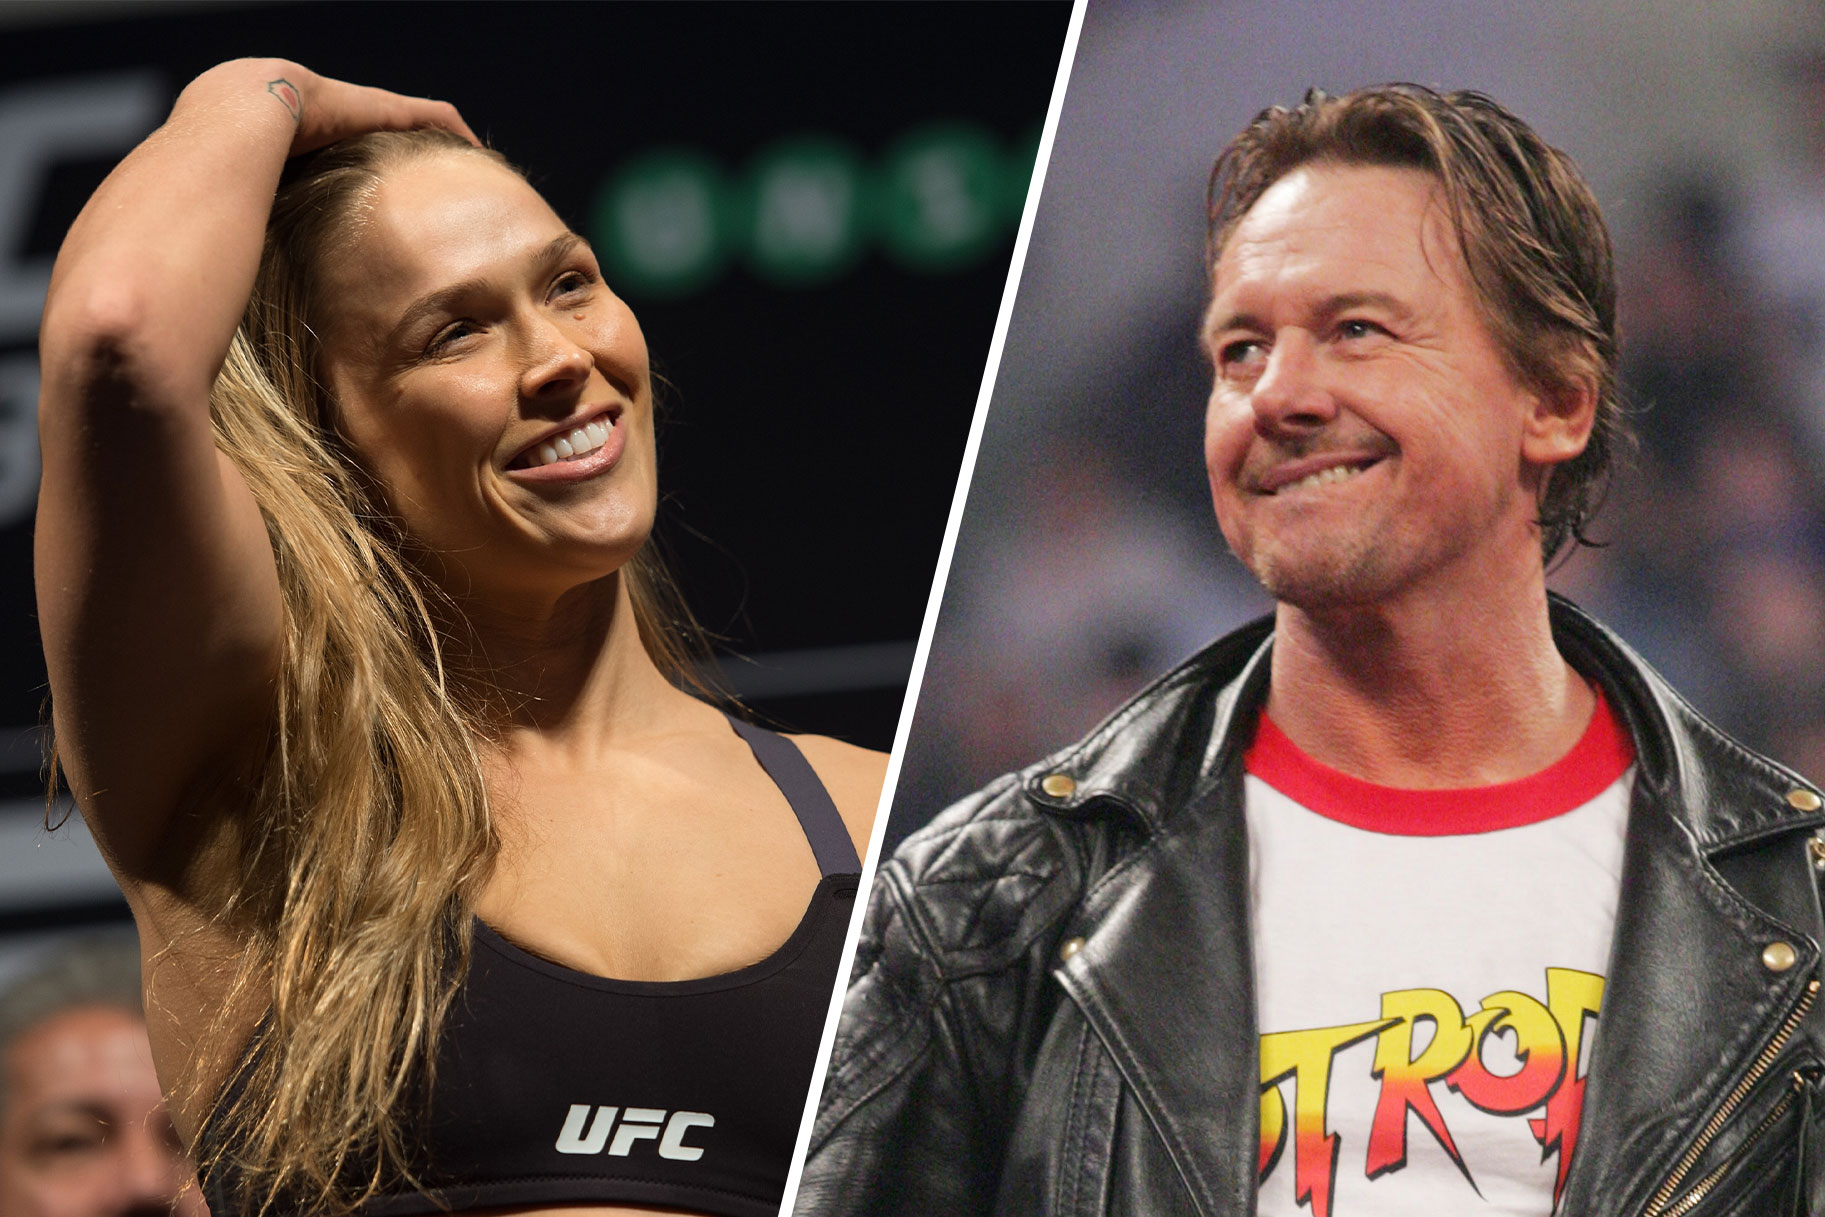 Split image of Ronda Rousey and Roddy Piper